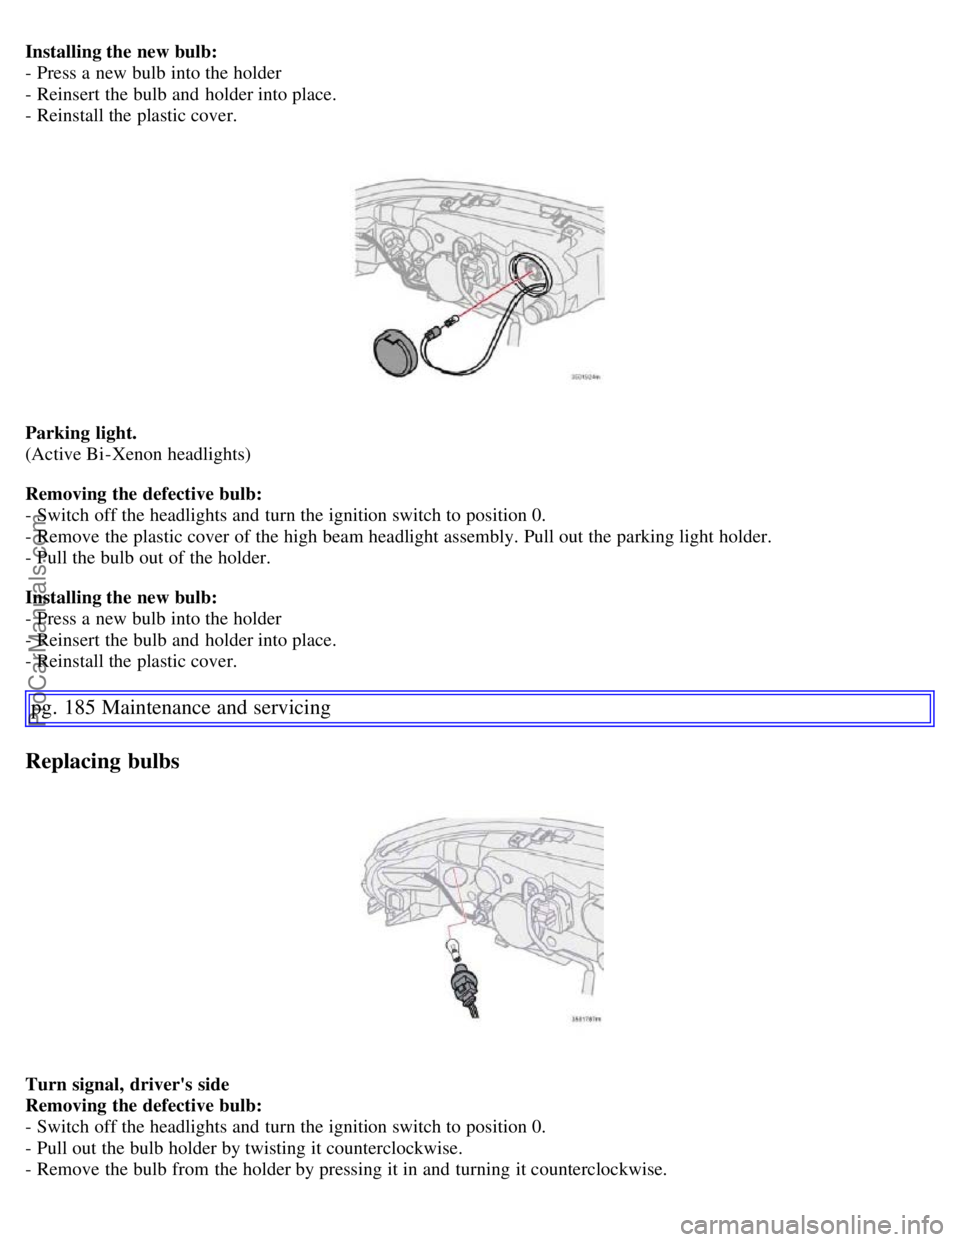 VOLVO S60 2007  Owners Manual Installing the new bulb:
- Press a  new bulb into the holder
- Reinsert the bulb and  holder into place.
- Reinstall the plastic cover.
Parking  light.
(Active Bi -Xenon headlights)
Removing the defec